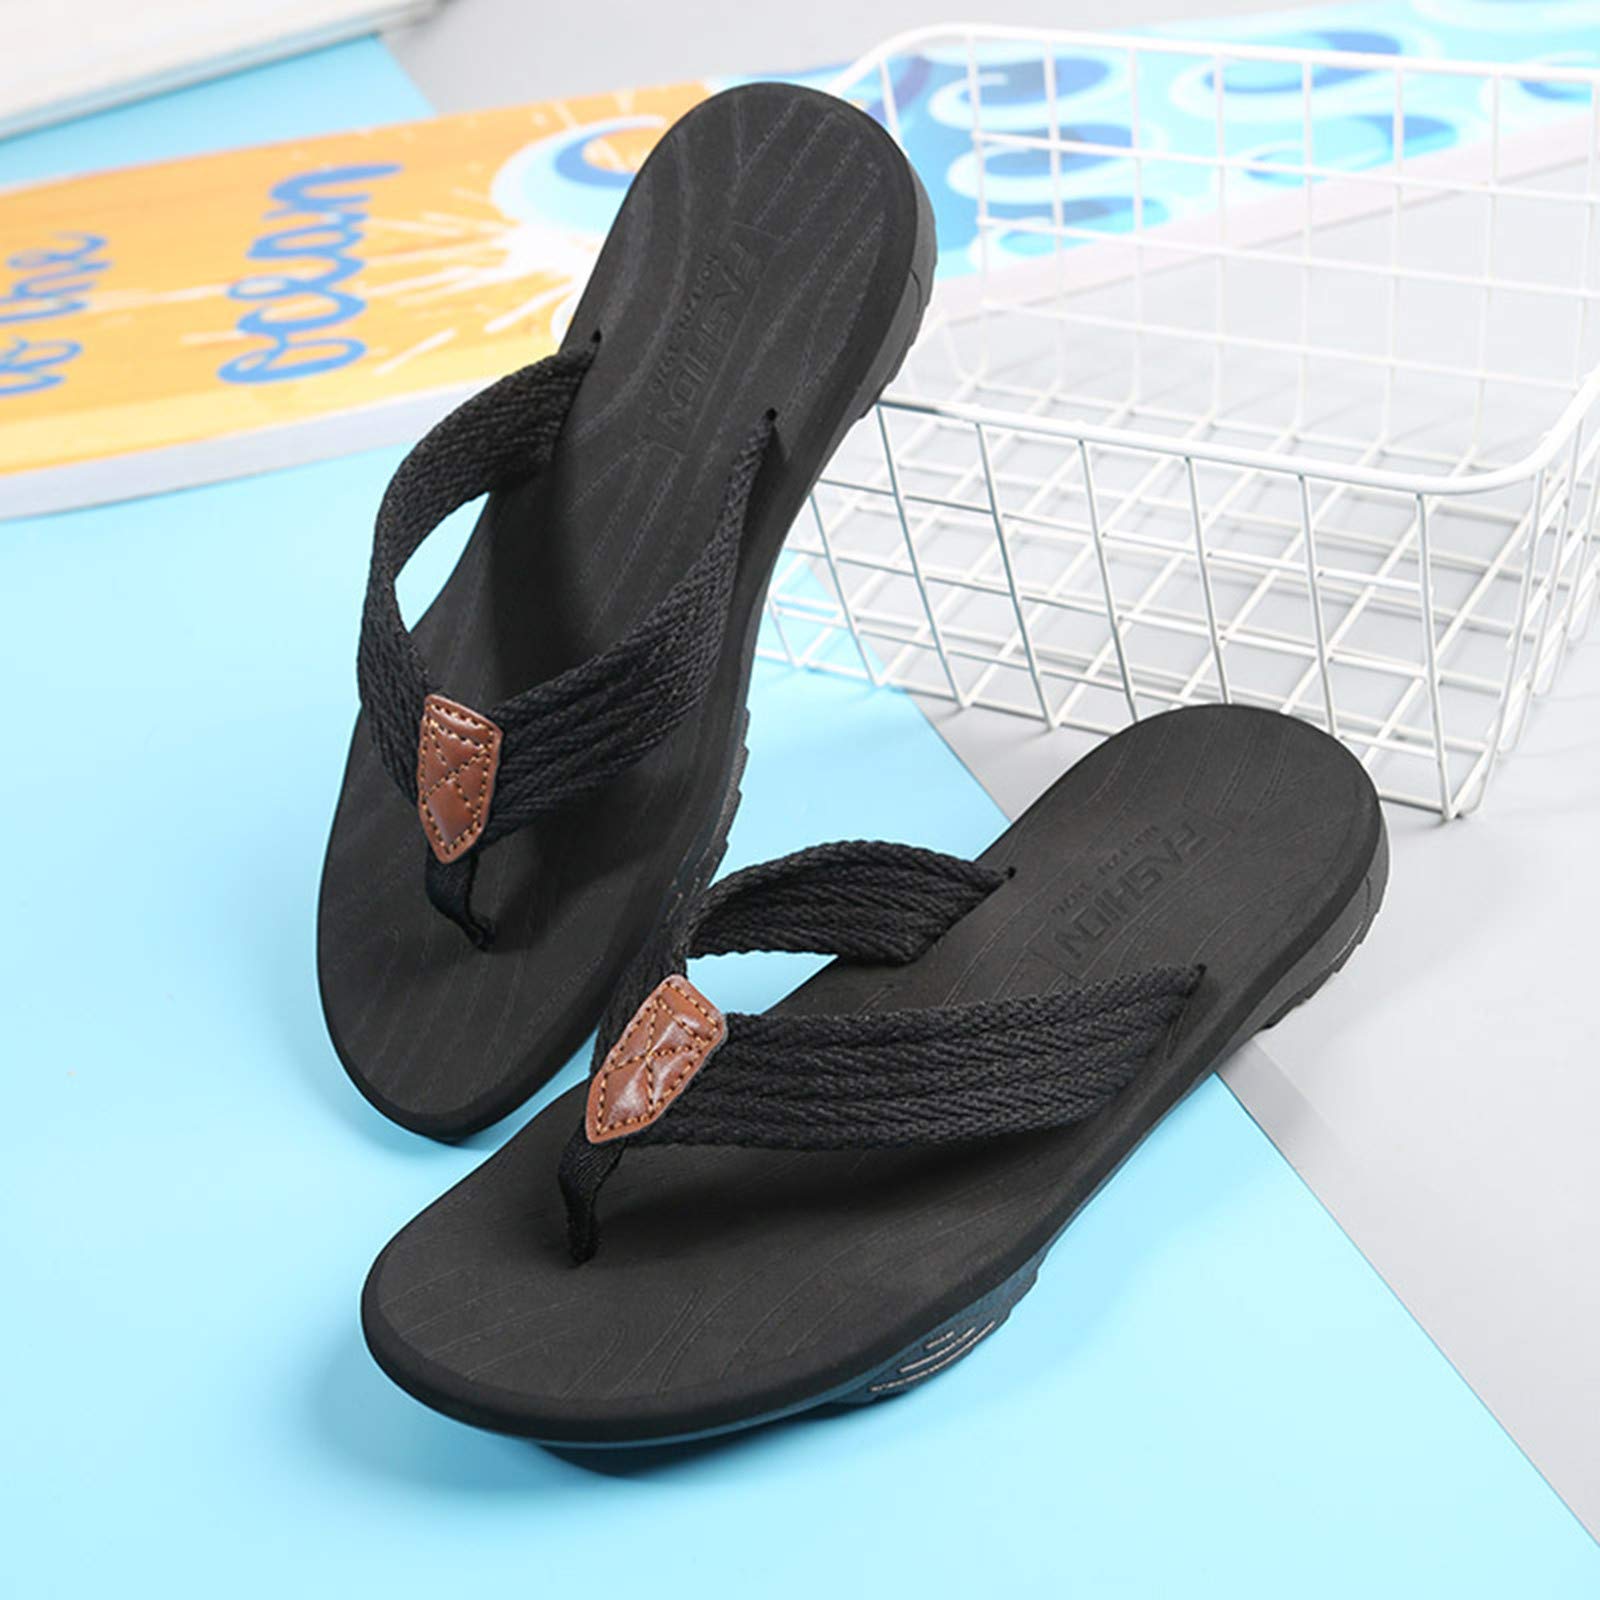 USYFAKGH Mens Sandals with Arch Support Orthotic Flip Flops for Plantar Fasciitis Flat Feet Indoor Outdoor Beach Slippers